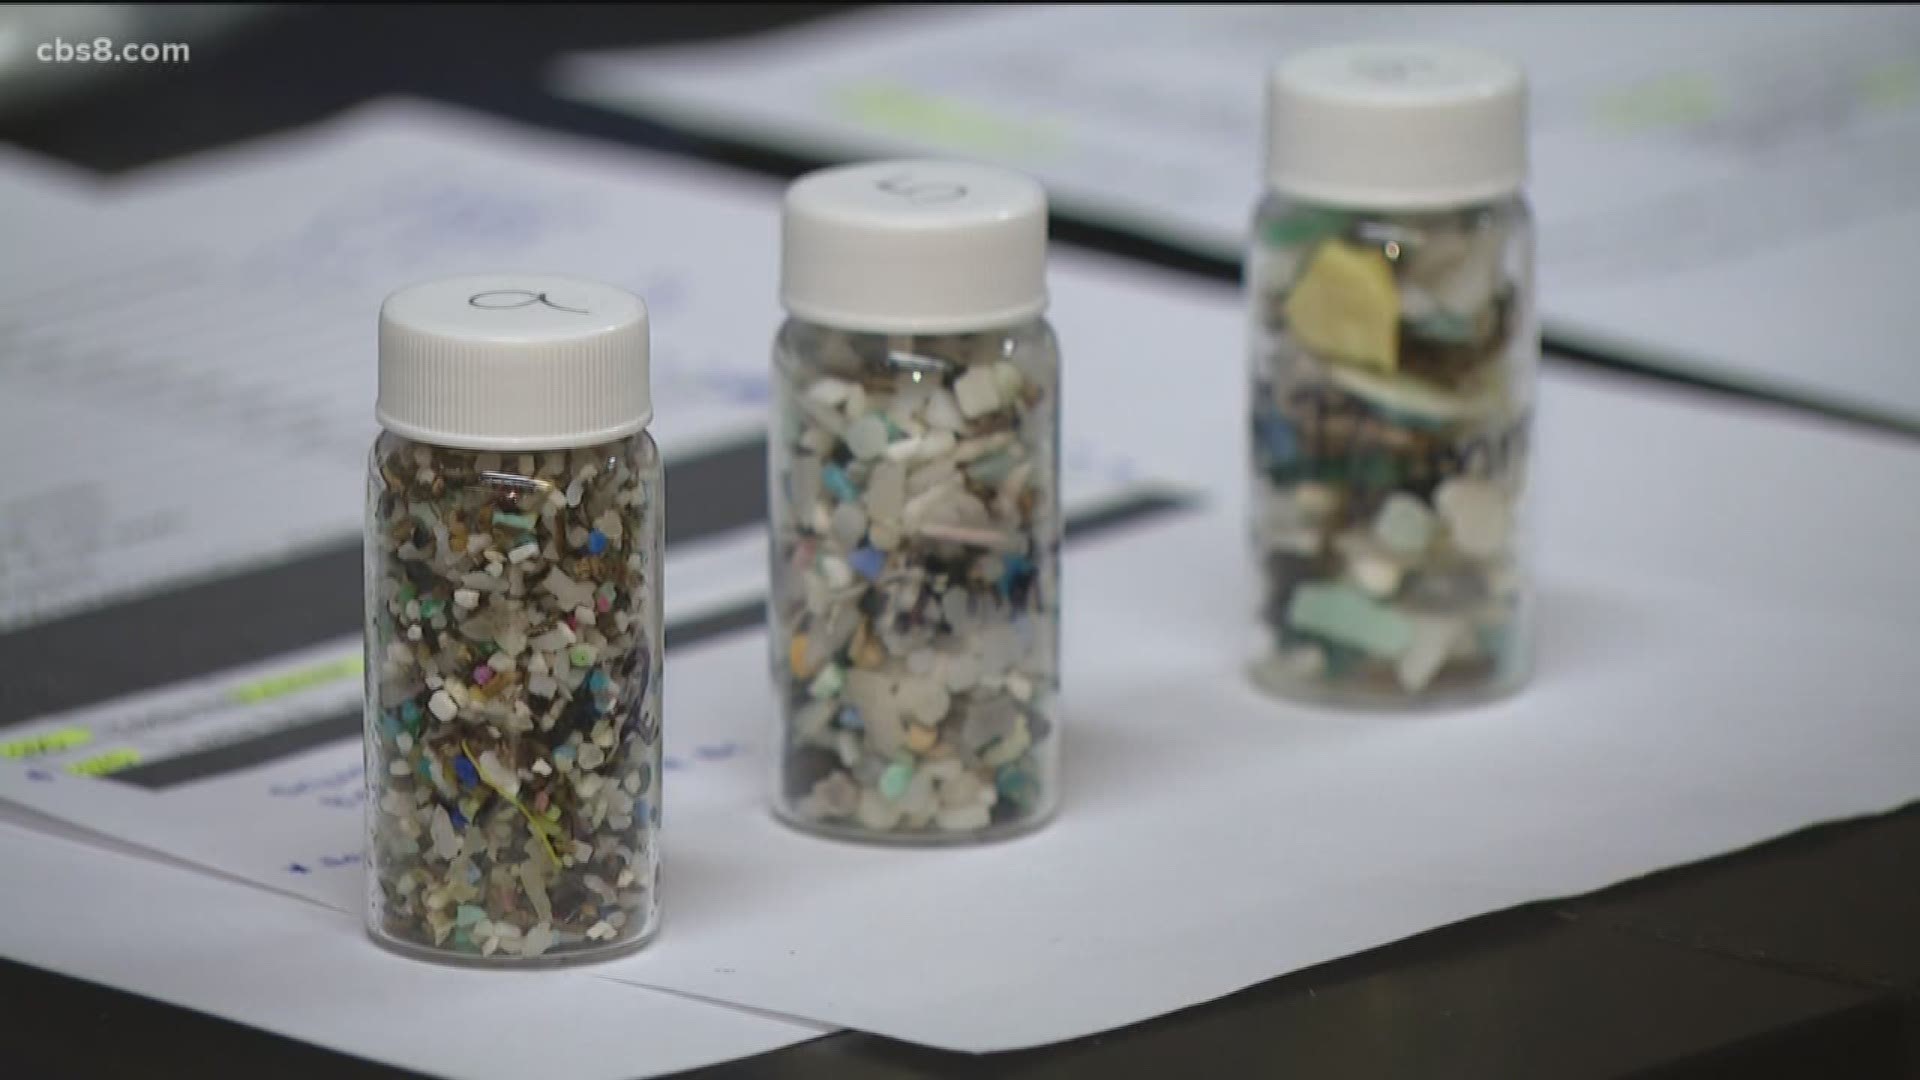 A new study in the Journal Environmental Science and Technology states it's possible we consume up to 52,000 microplastics a year.